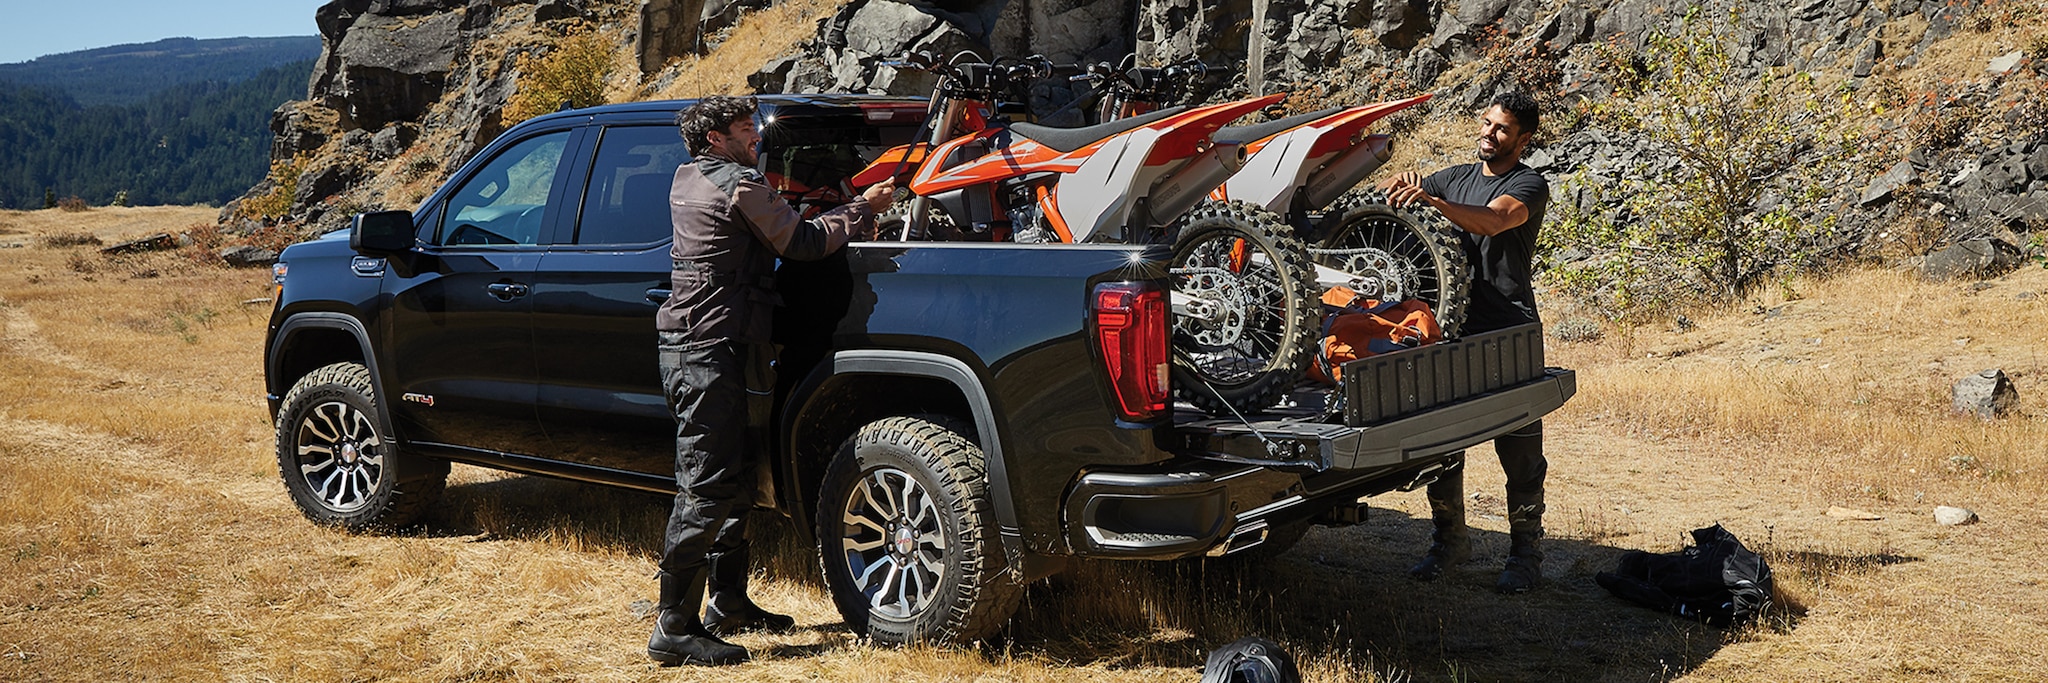 2019 GMC Sierra with MultiPro Tailgate